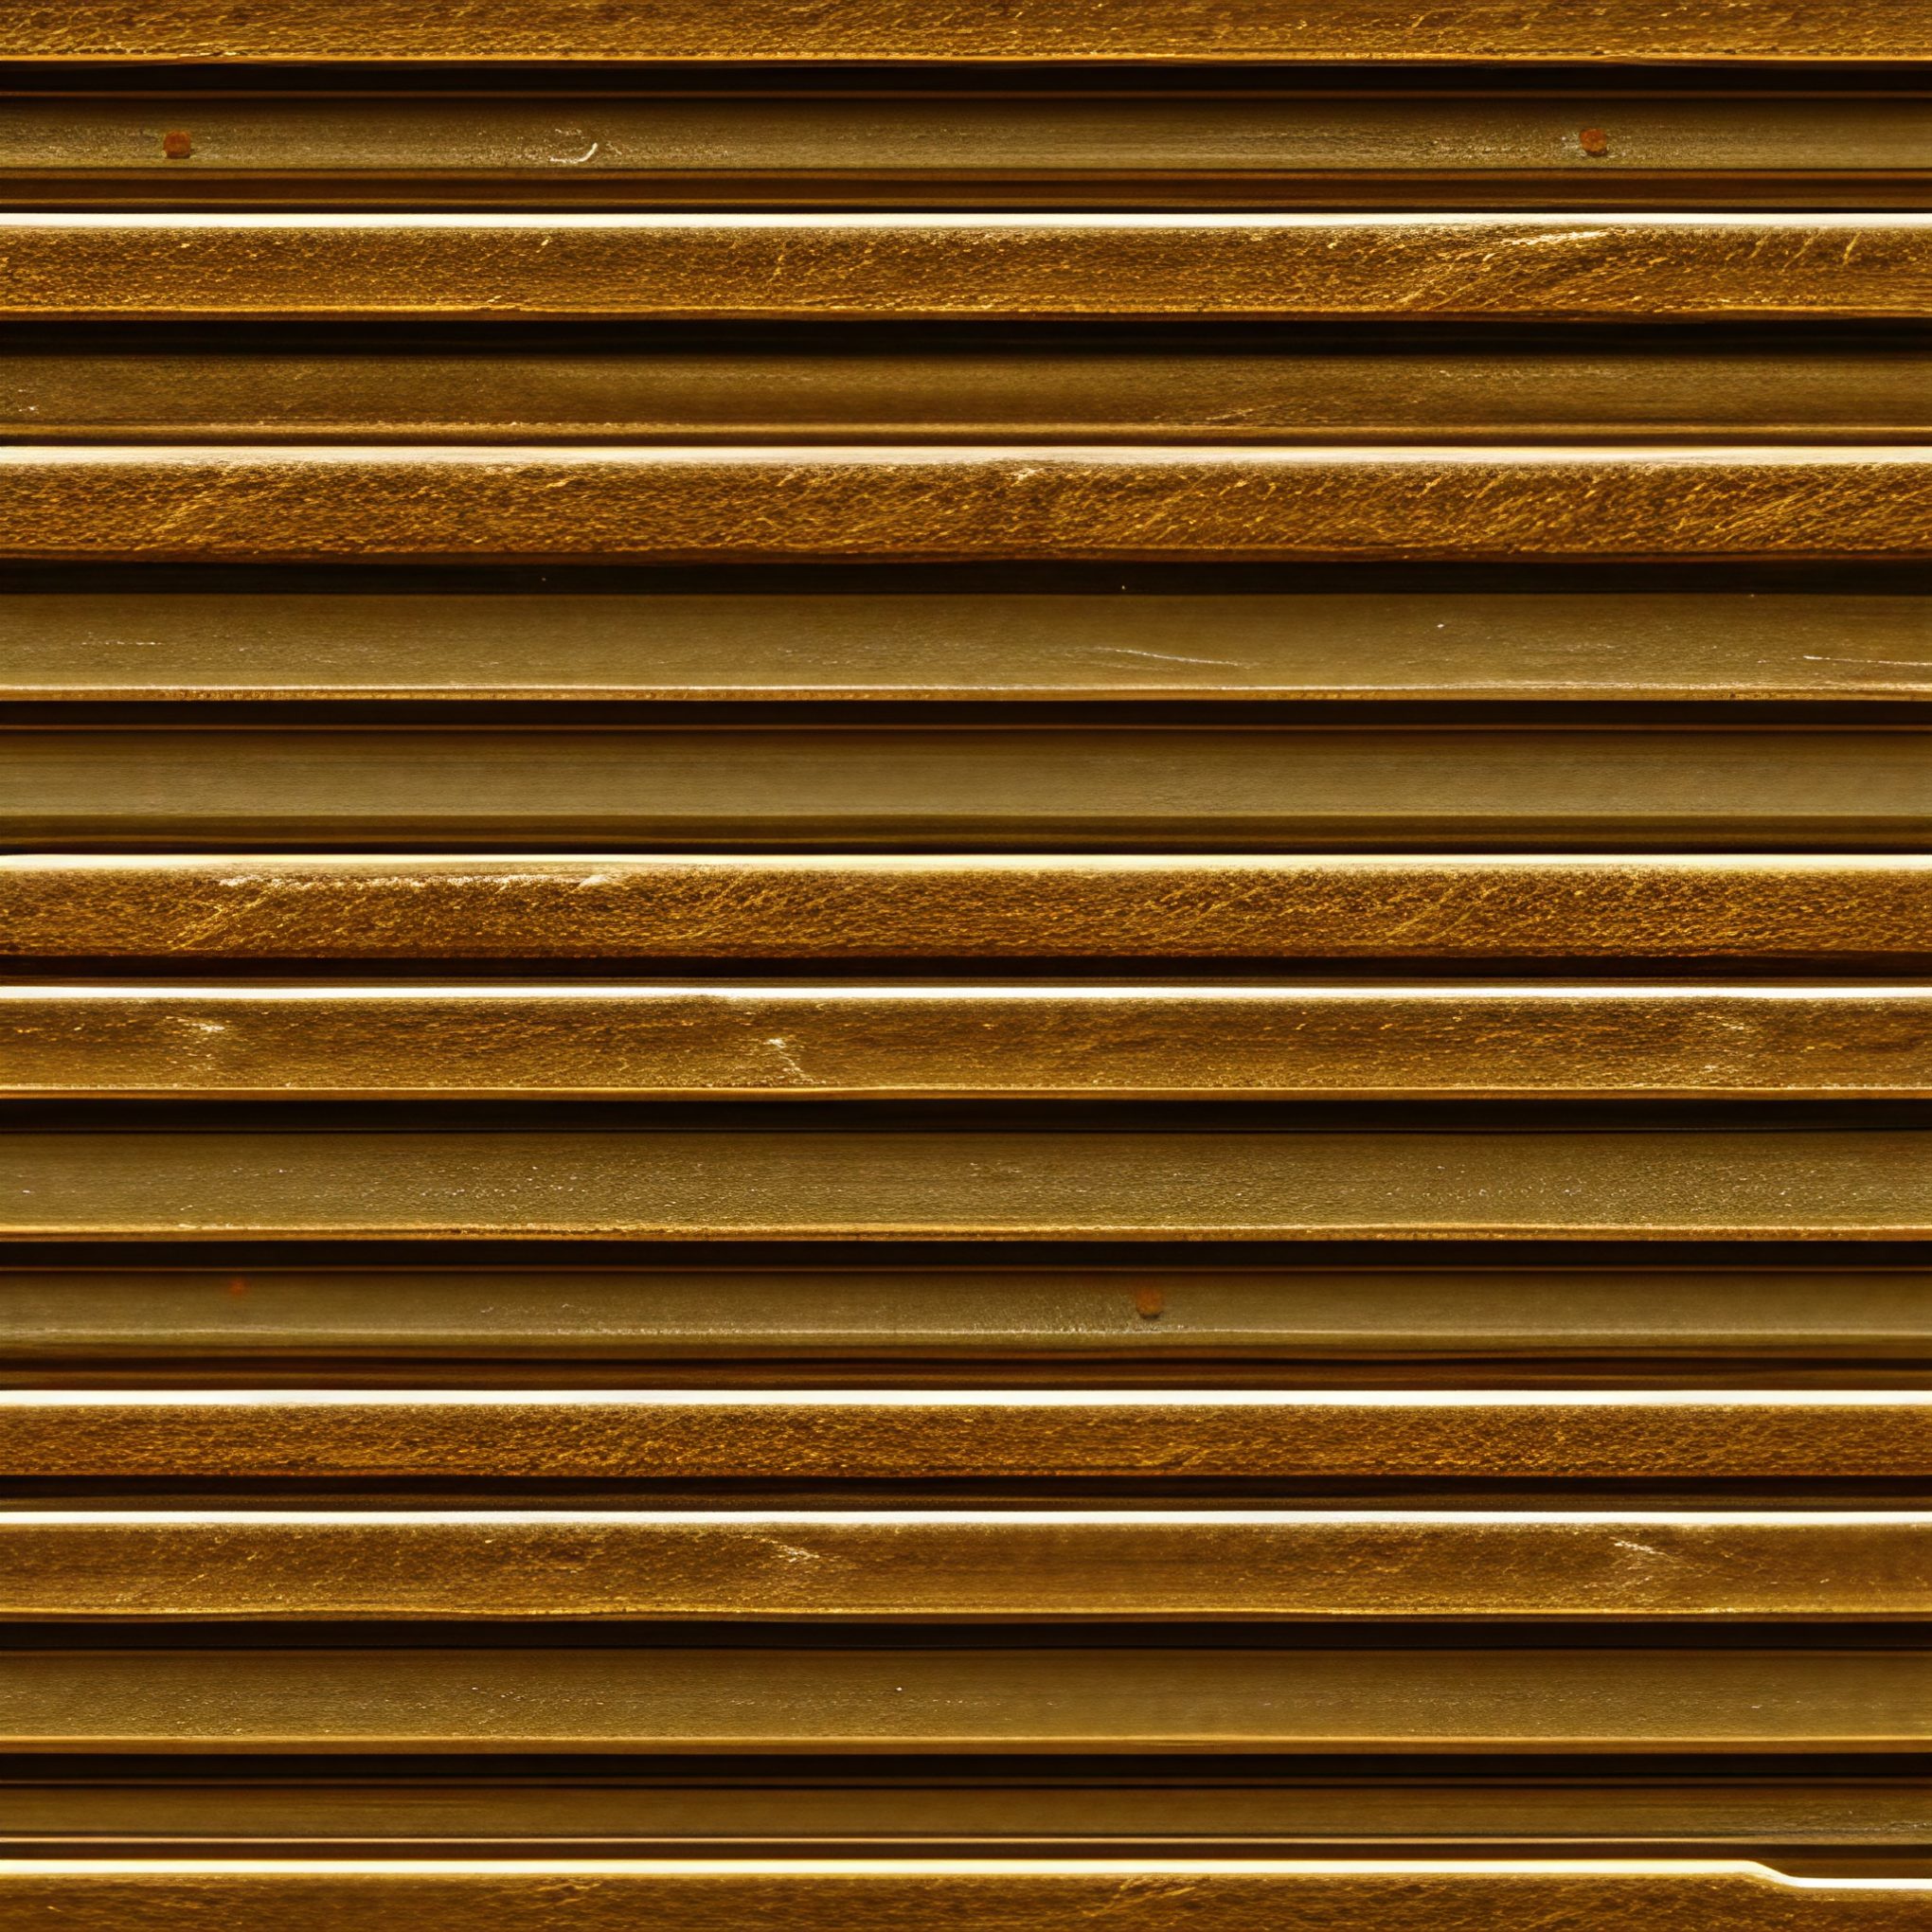 Gold Panel Background Texture Free Stock Image